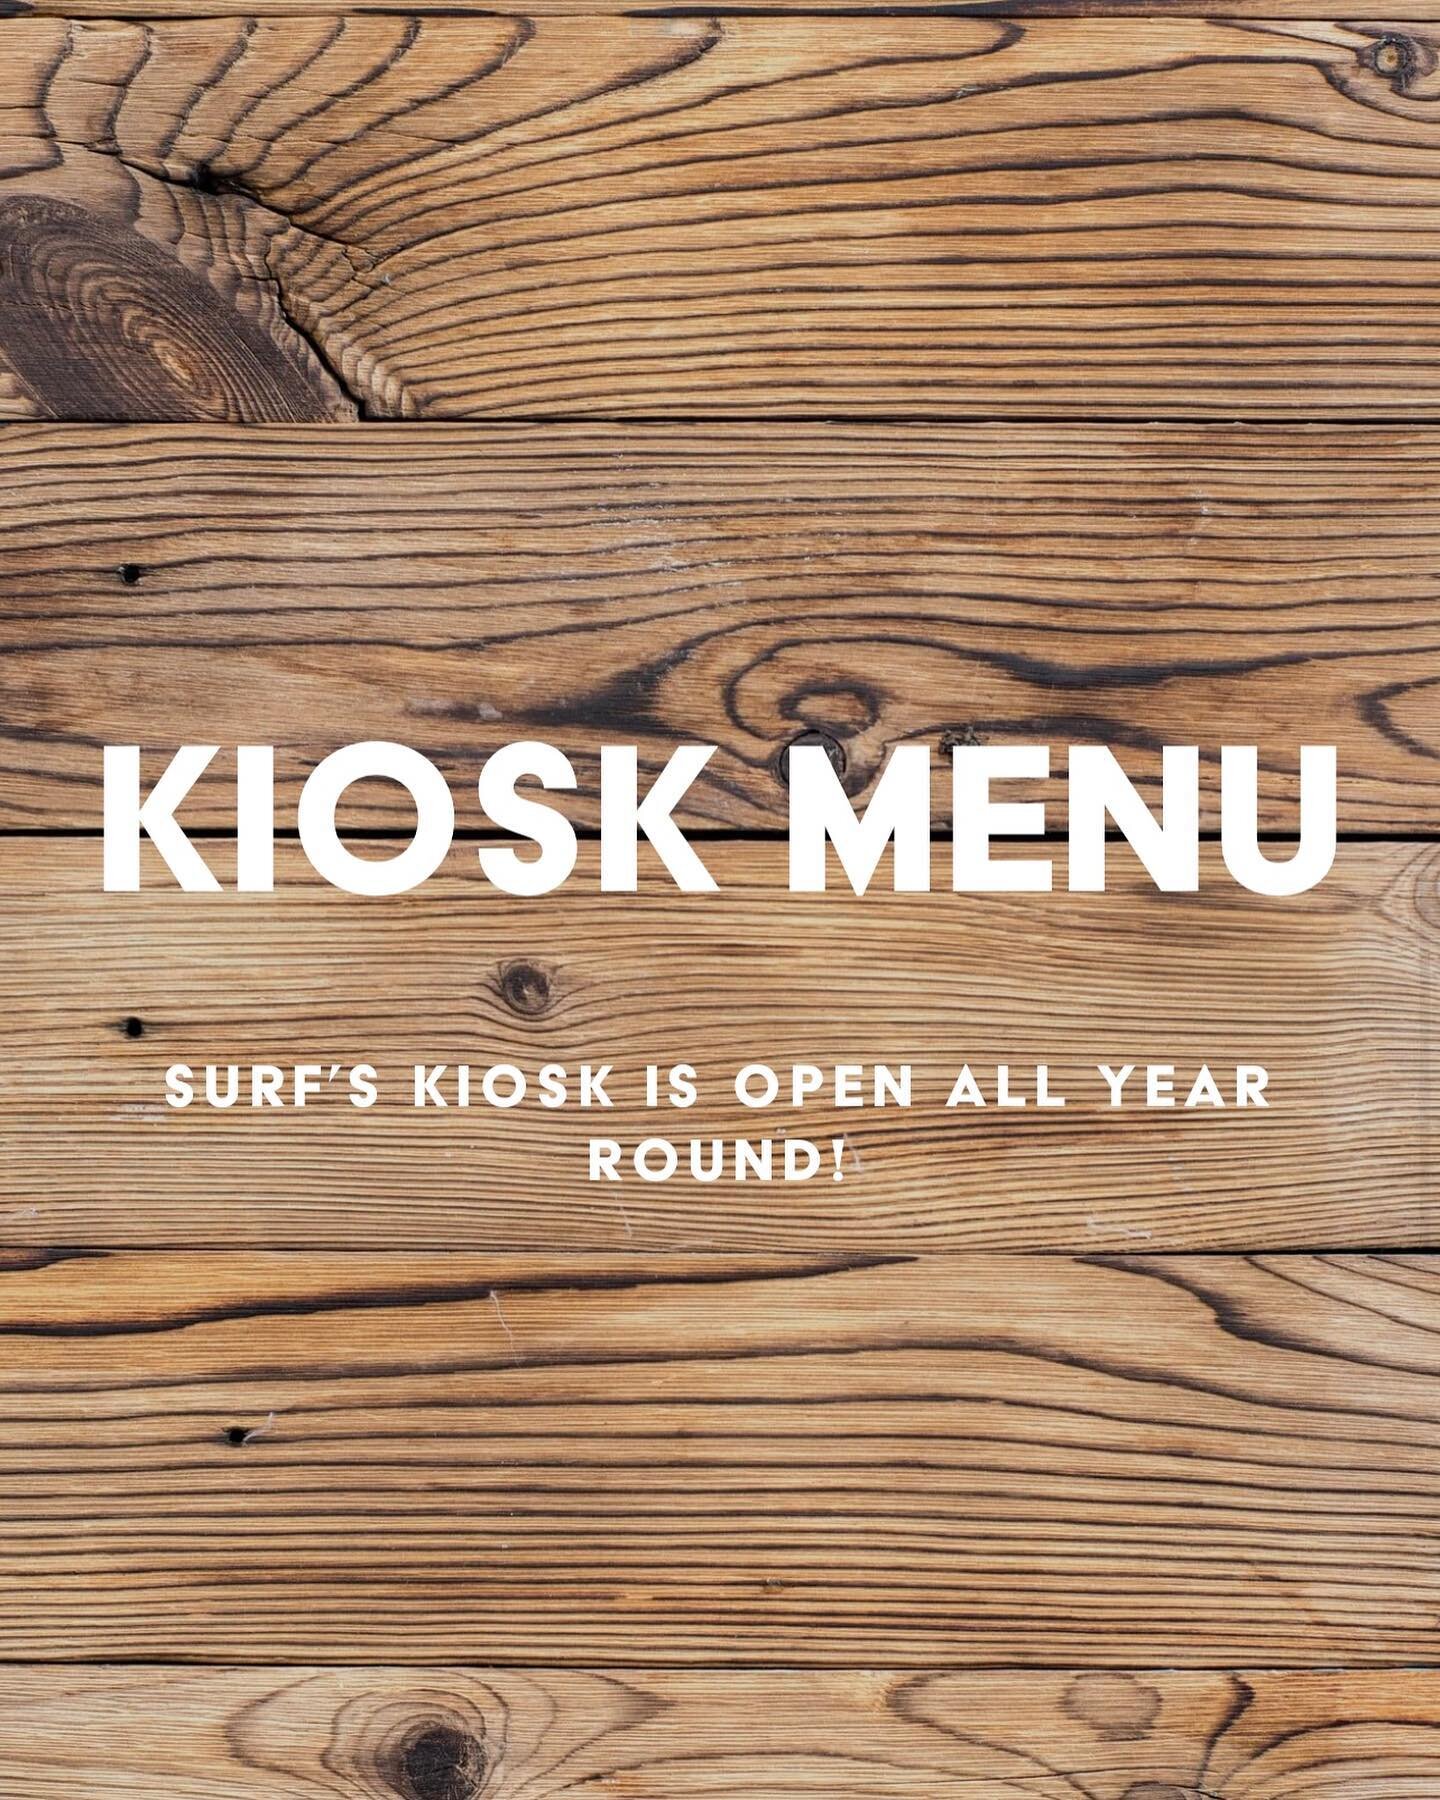 K I O S K ||

Don&rsquo;t forget you can view our delicious Kiosk Menu on our website 🙌🏻 🌊💙

Check it out at ...

www.surfchalkwell.co.uk